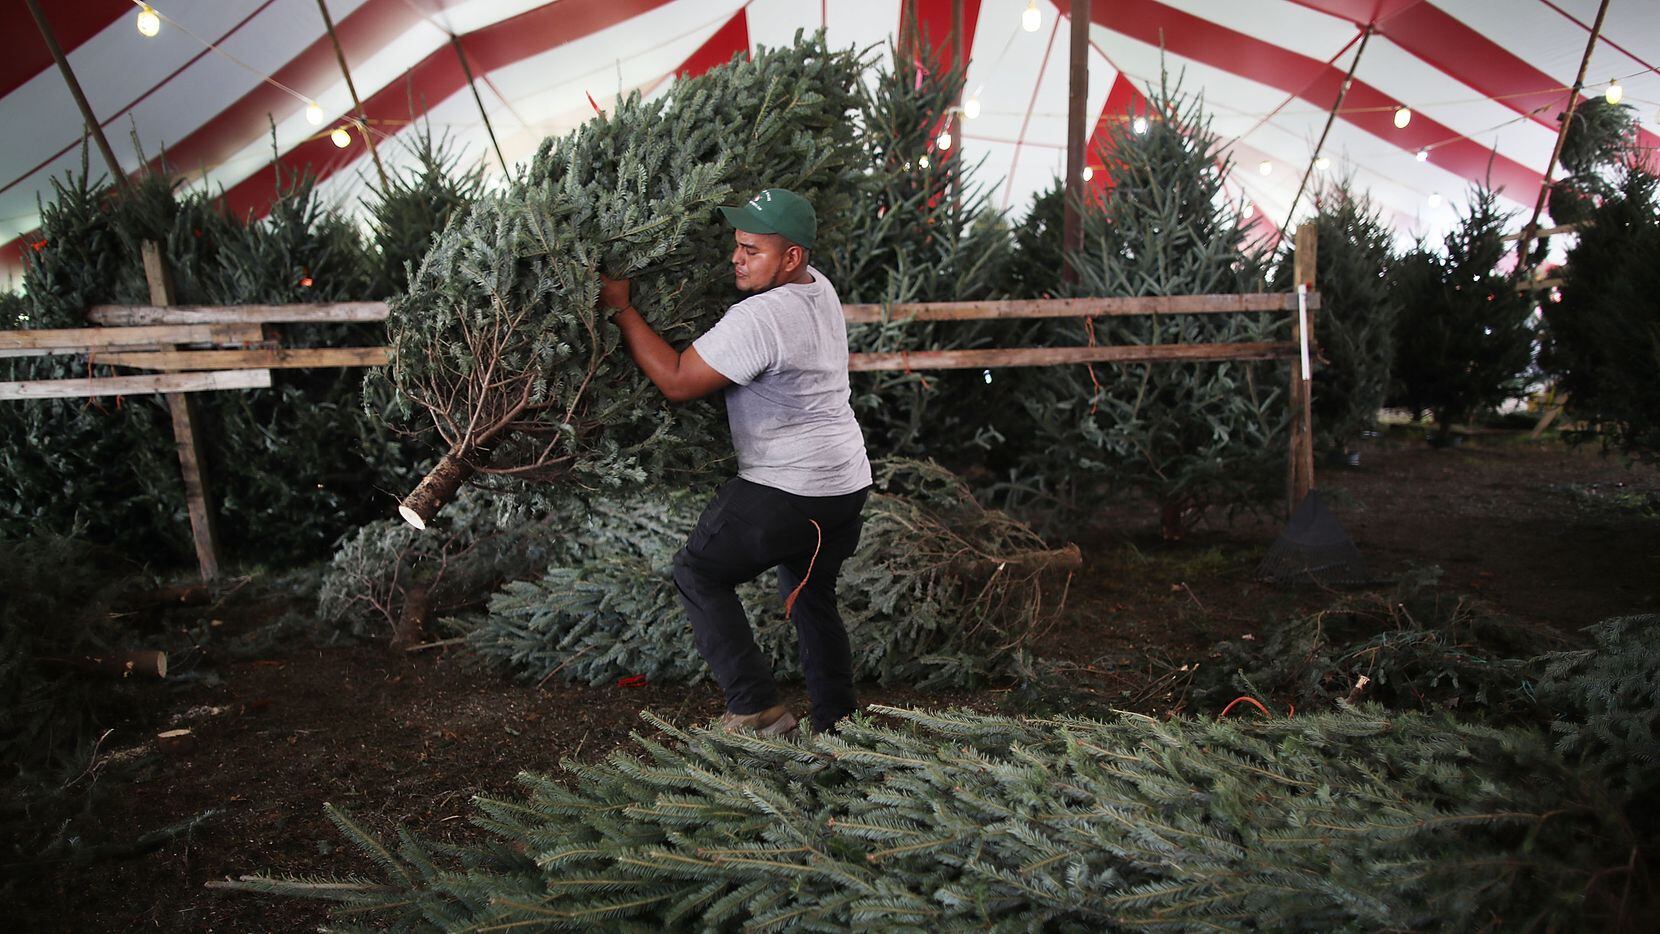 MIAMI, FL - DECEMBER 18: Marco Gomez prepares a Christmas tree for sale at Holiday Sale on December 18, 2017 in Miami, Florida.   The National Christmas Tree Association announced that there is a tree shortage this year which is driving up prices and causing people to have to shop around to find trees.  (Photo by Joe Raedle/Getty Images)